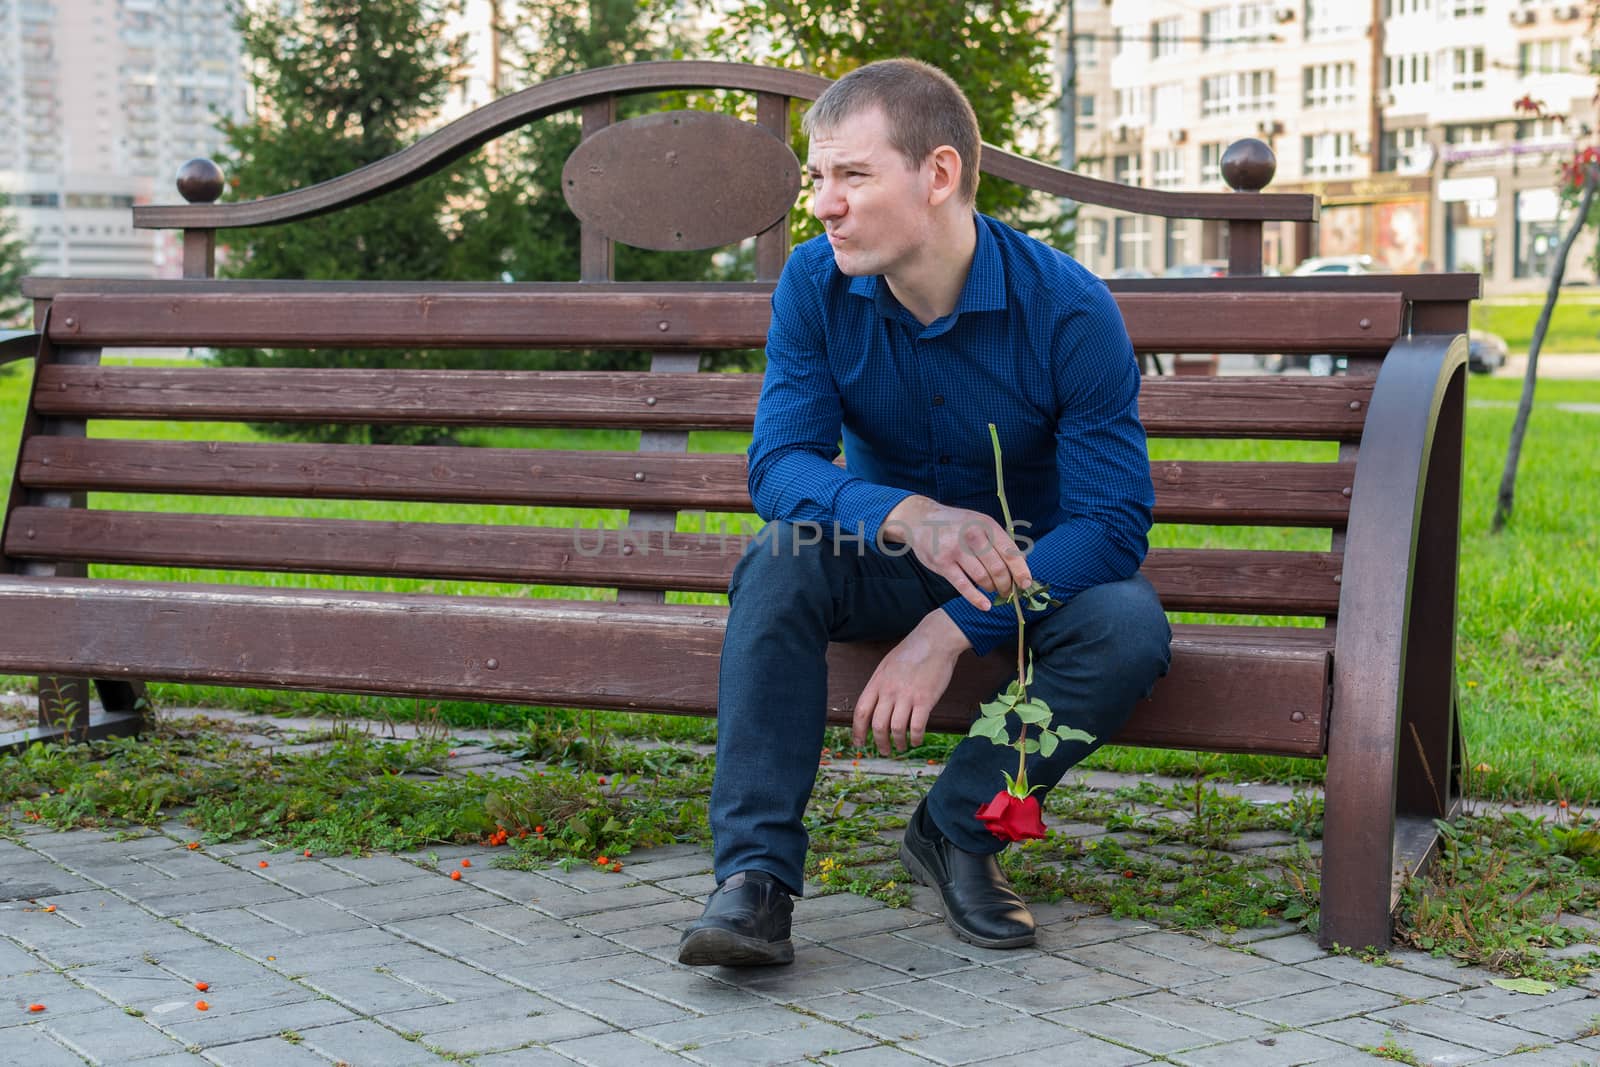 Displeased man with a rose in his hands is watching someone in the park by Skaron